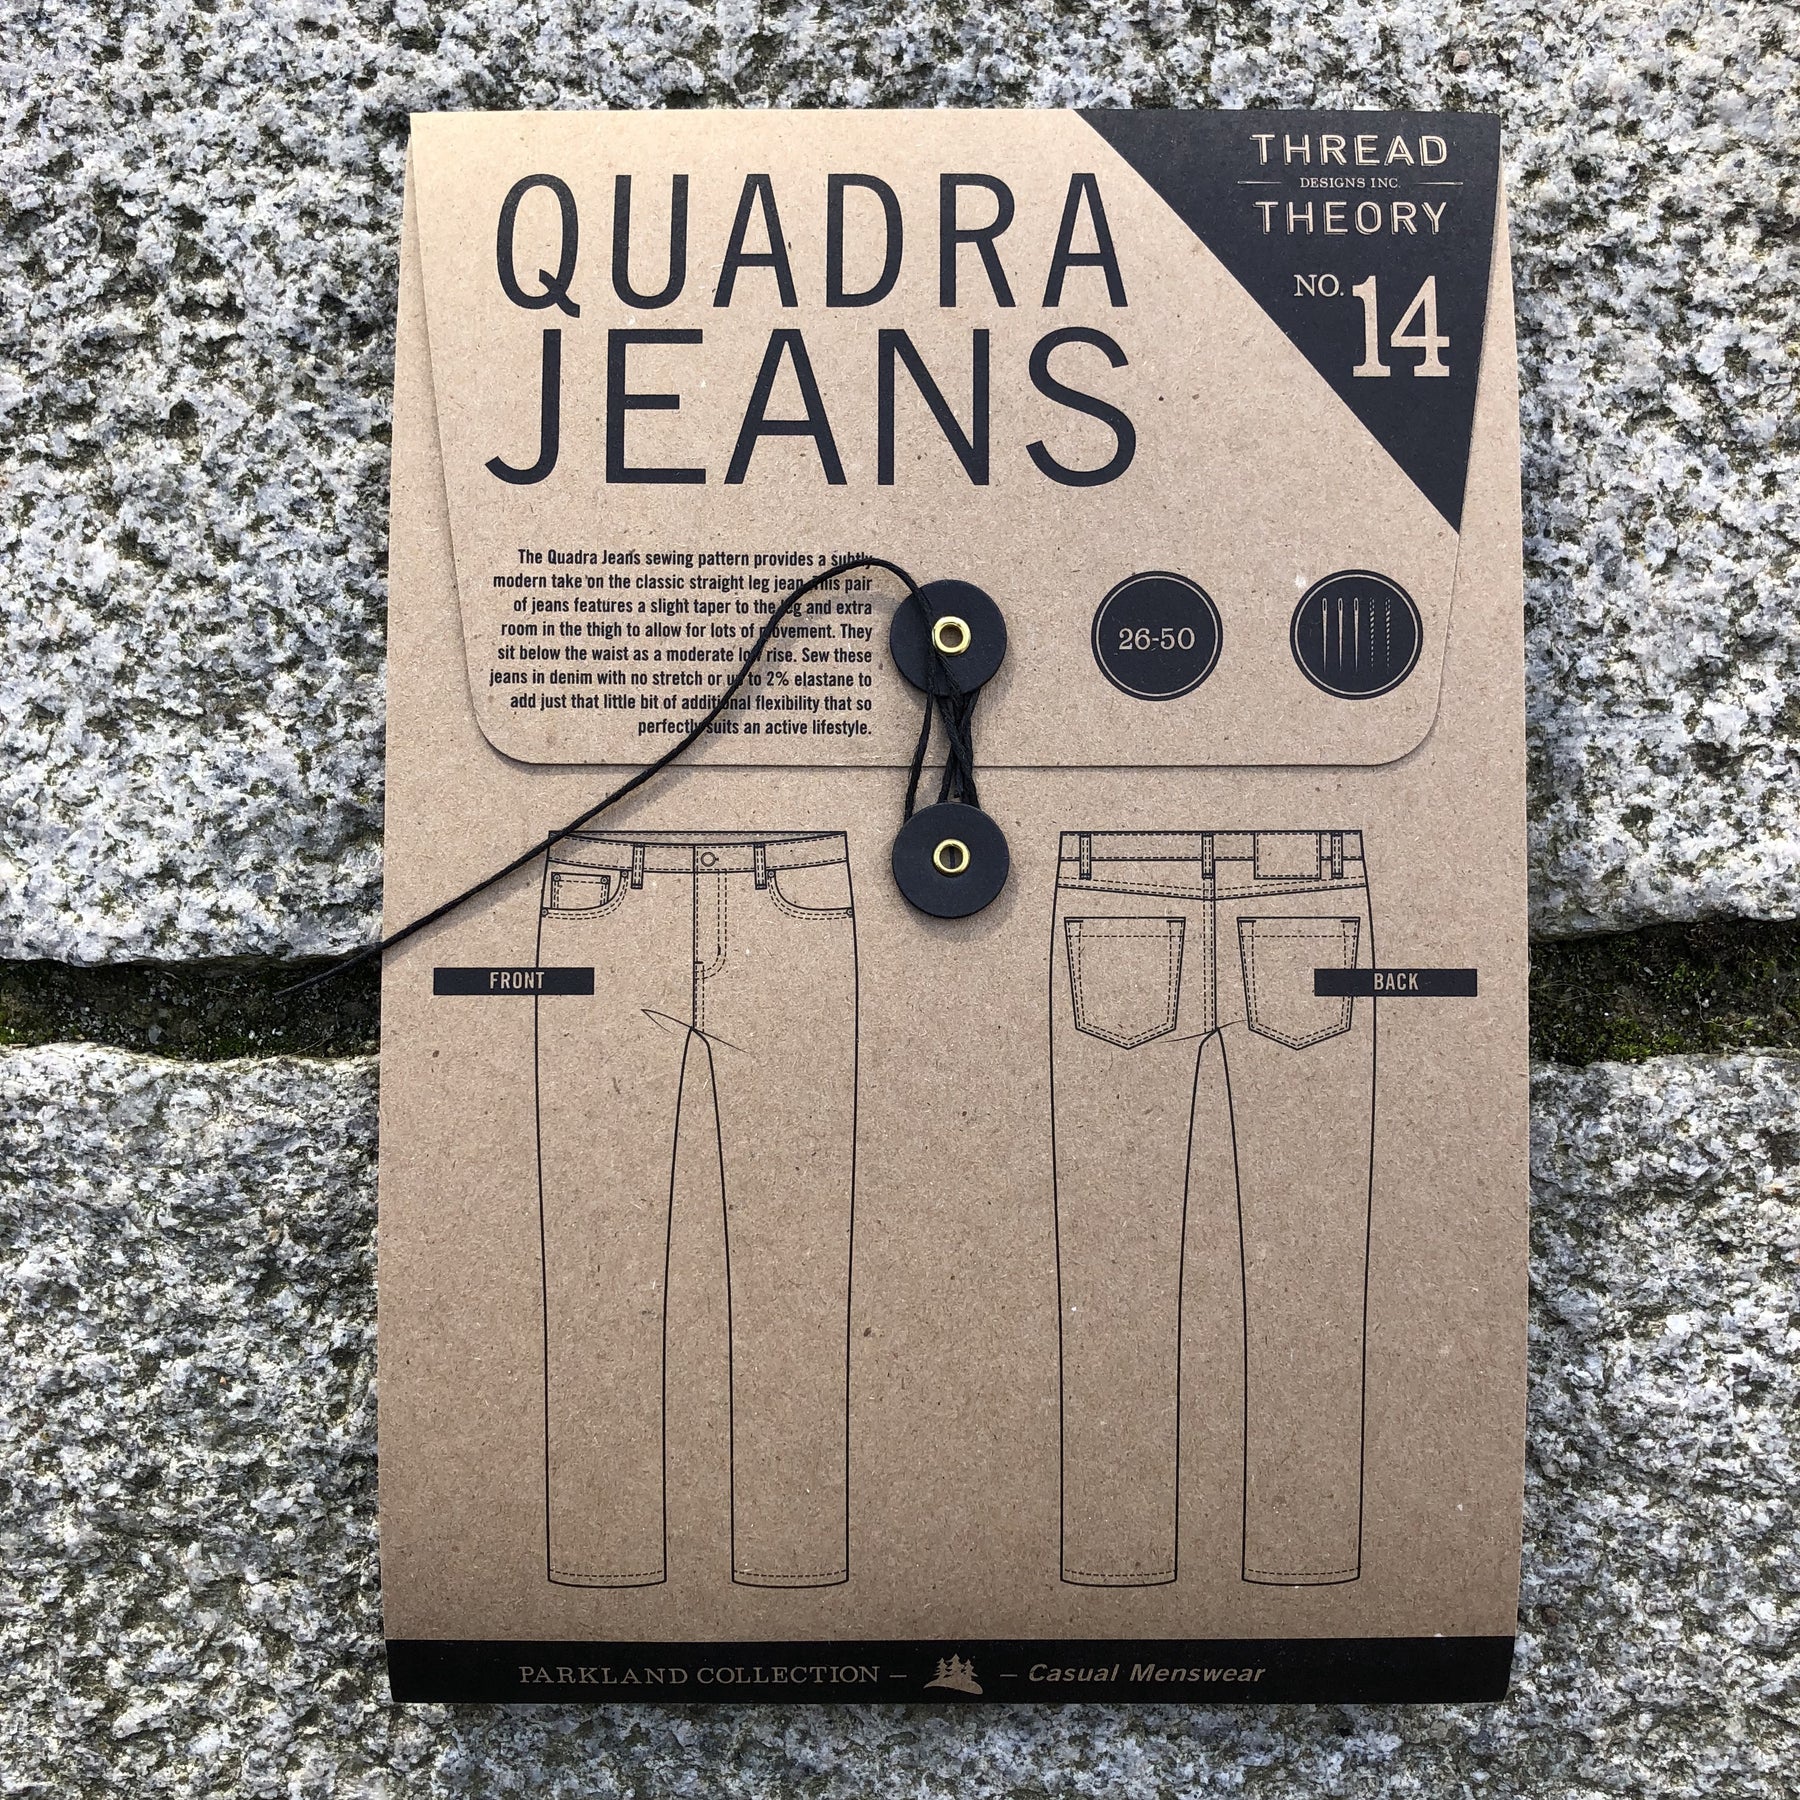 Quadra Jeans Pattern by Thread Theory – Make At 140